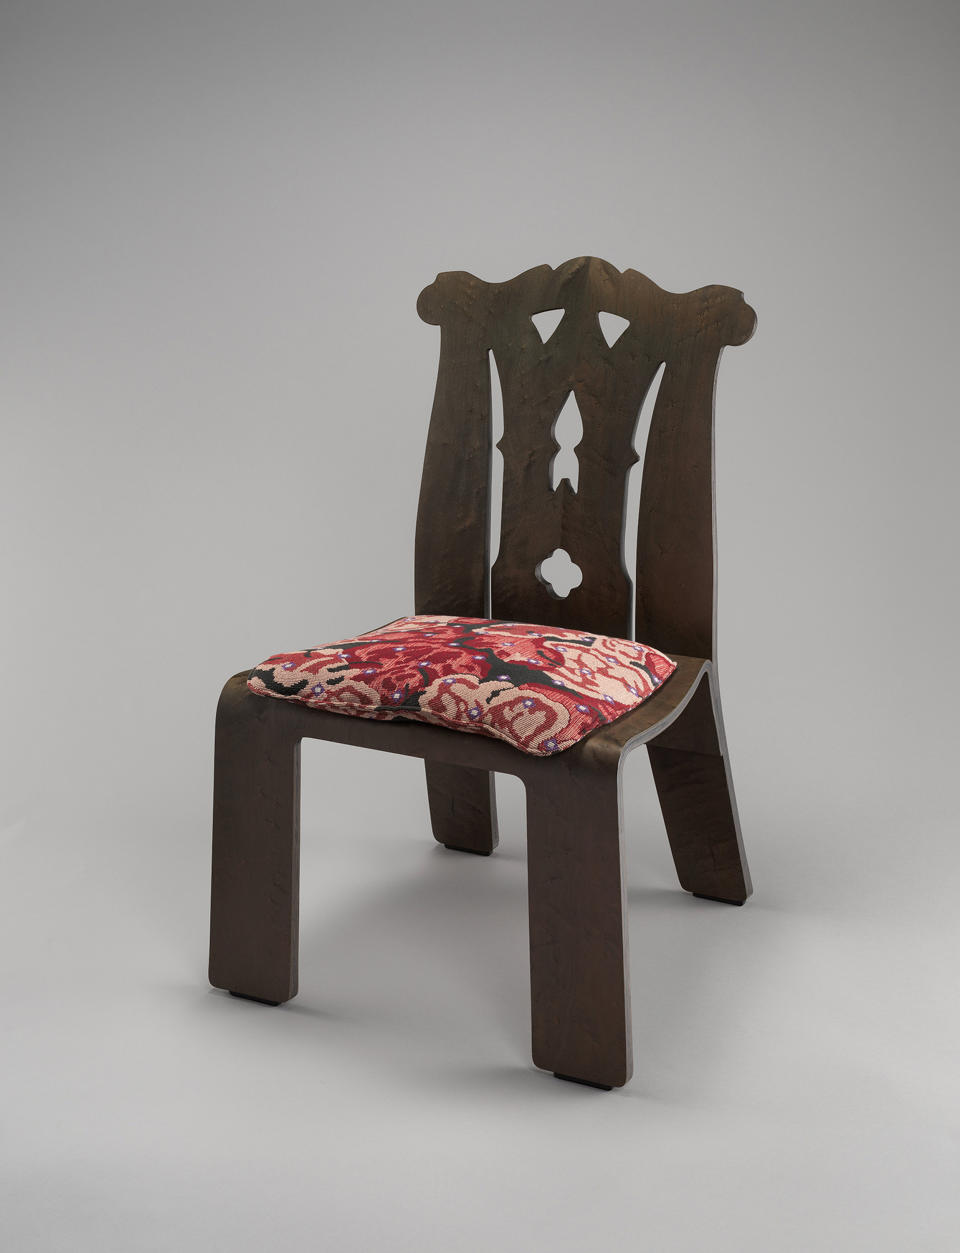 This photo provided by The Metropolitan Museum of Art shows a "Chippendale" Chair with "Tapestry" pattern upholstery which was Designed by Robert Venturi and Denise-Scott Brown in Philadelphia and is featured in the exhibit "Chippendale's Director: The Designs and Legacy of a Furniture Maker," which runs through Jan. 27, 2019, at the museum in New York. (The Metropolitan Museum of Art via AP)